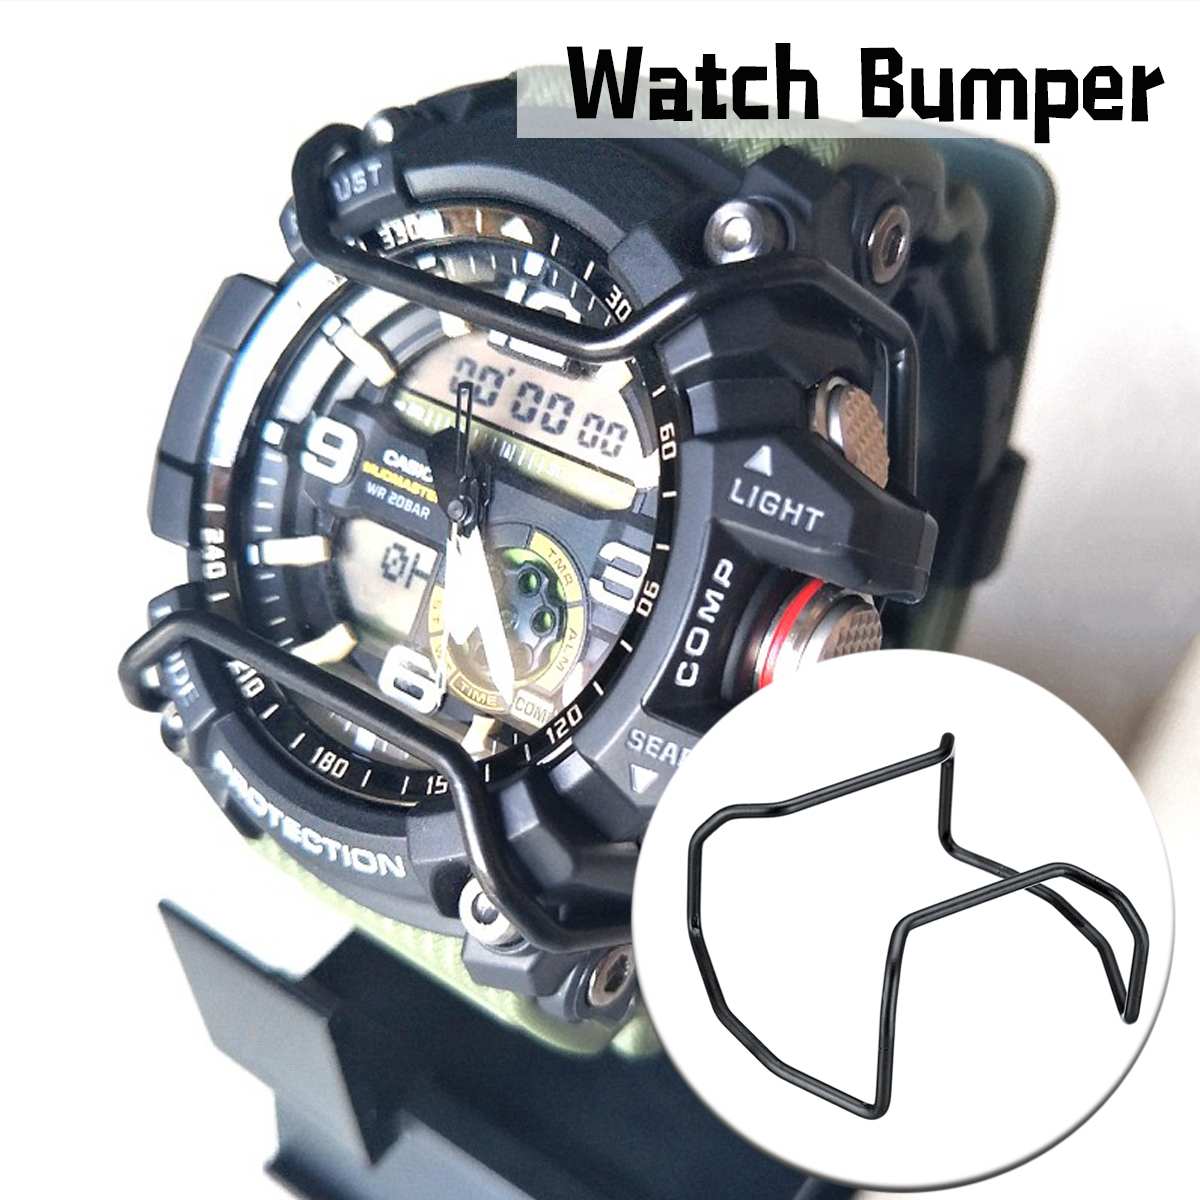 1Pc Matte Black Watch Bumper Case Protector Wire Guards For G-Shock GG1000 Watch Protection Bumper Accessories